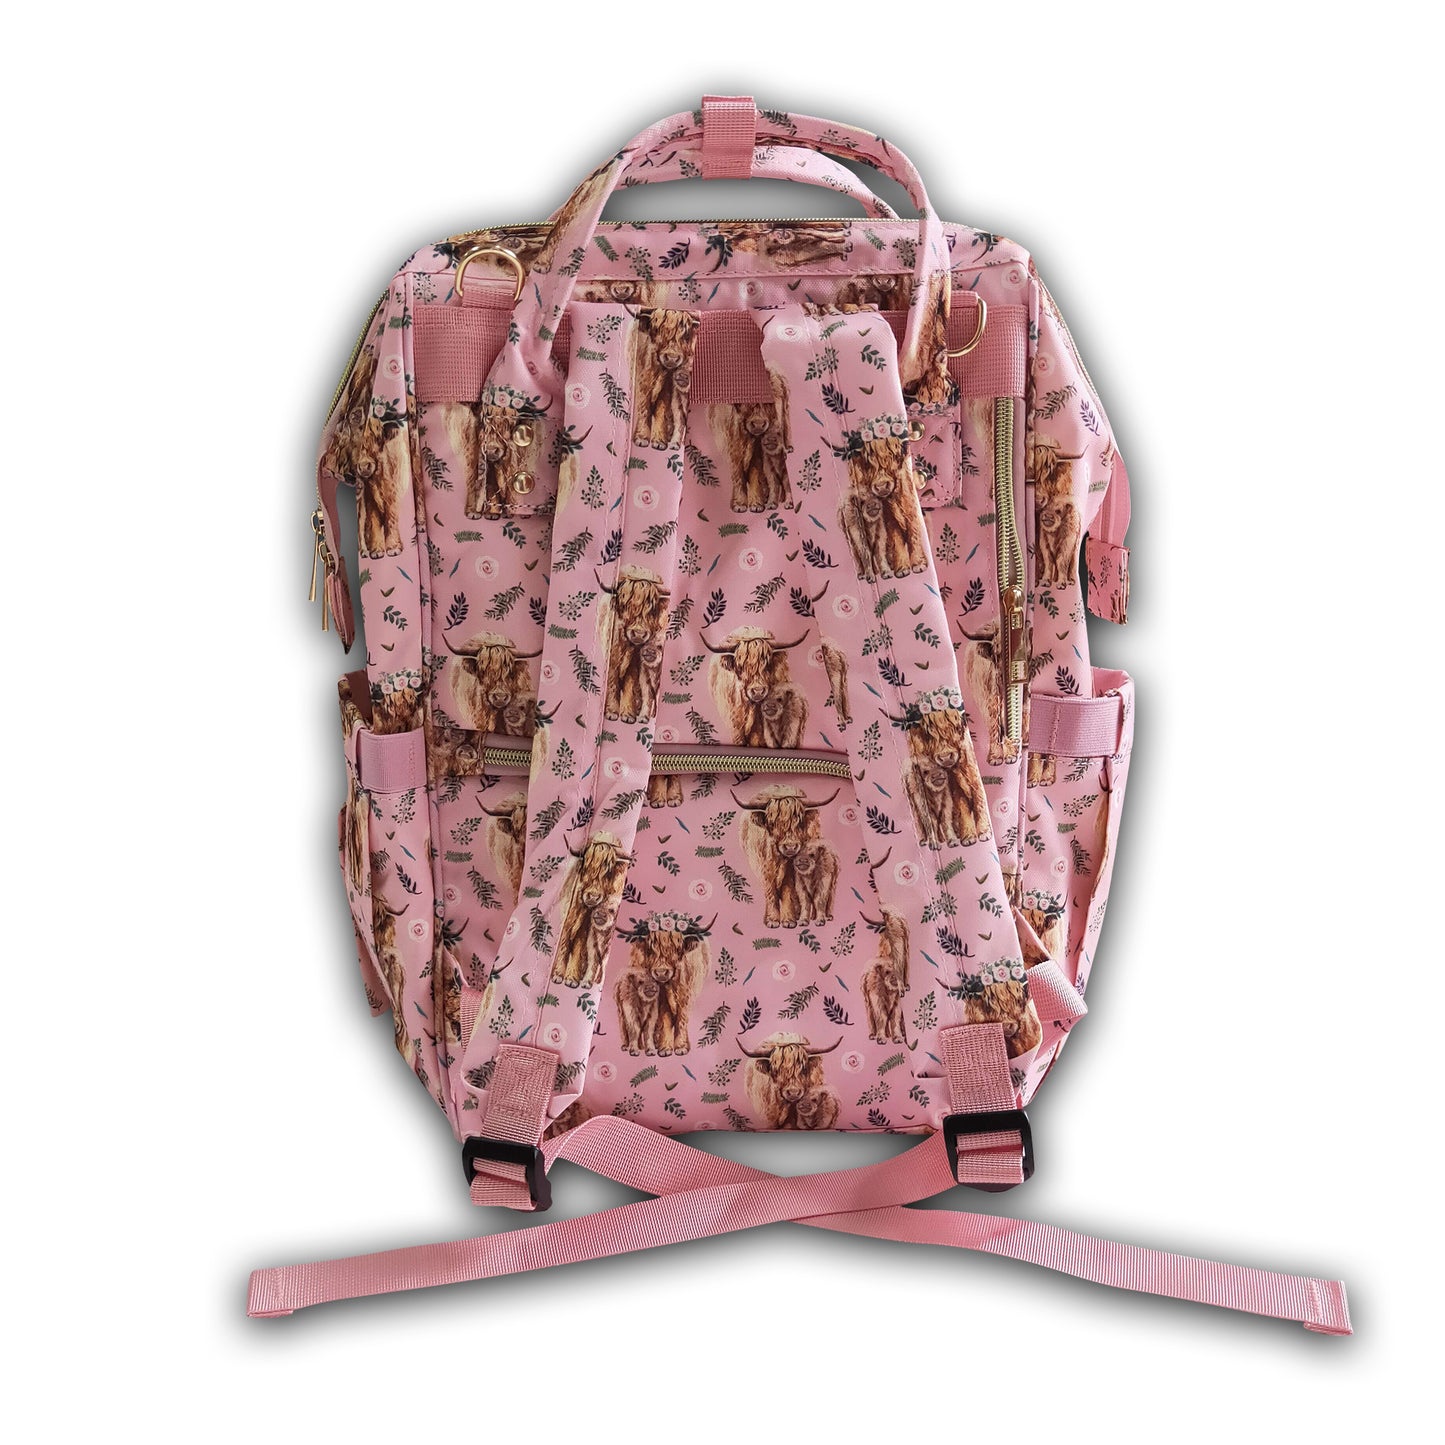 Highland cow floral baby diaper backpack